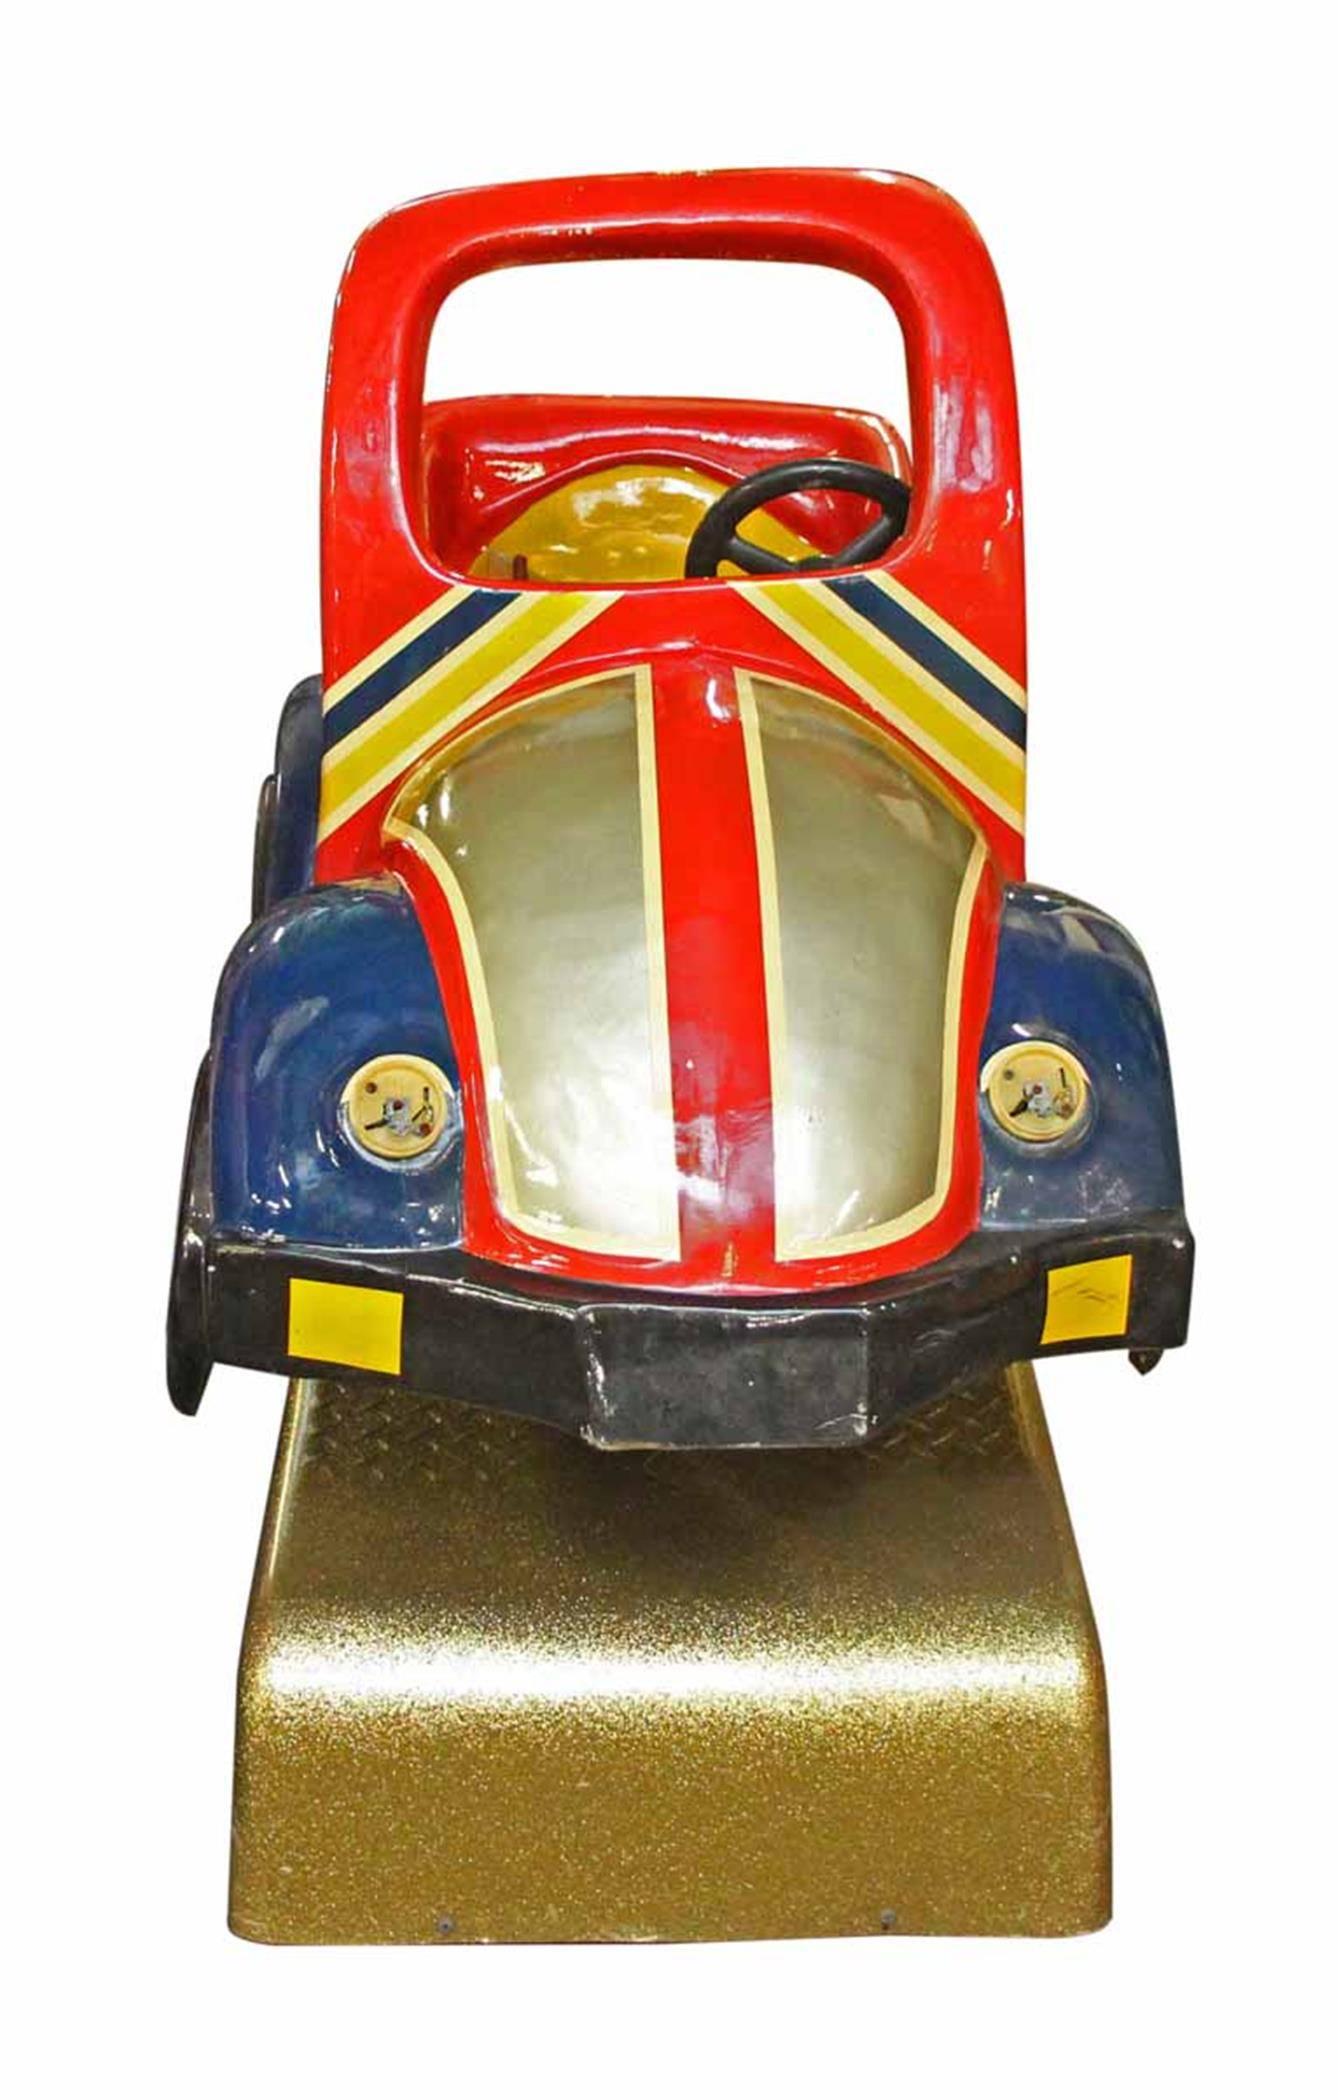 Colorful Volkswagen kiddie car ride from circa 1972. This has not been tested. Please inquire about working order. This can be seen at our 400 Gilligan St location in Scranton, PA.